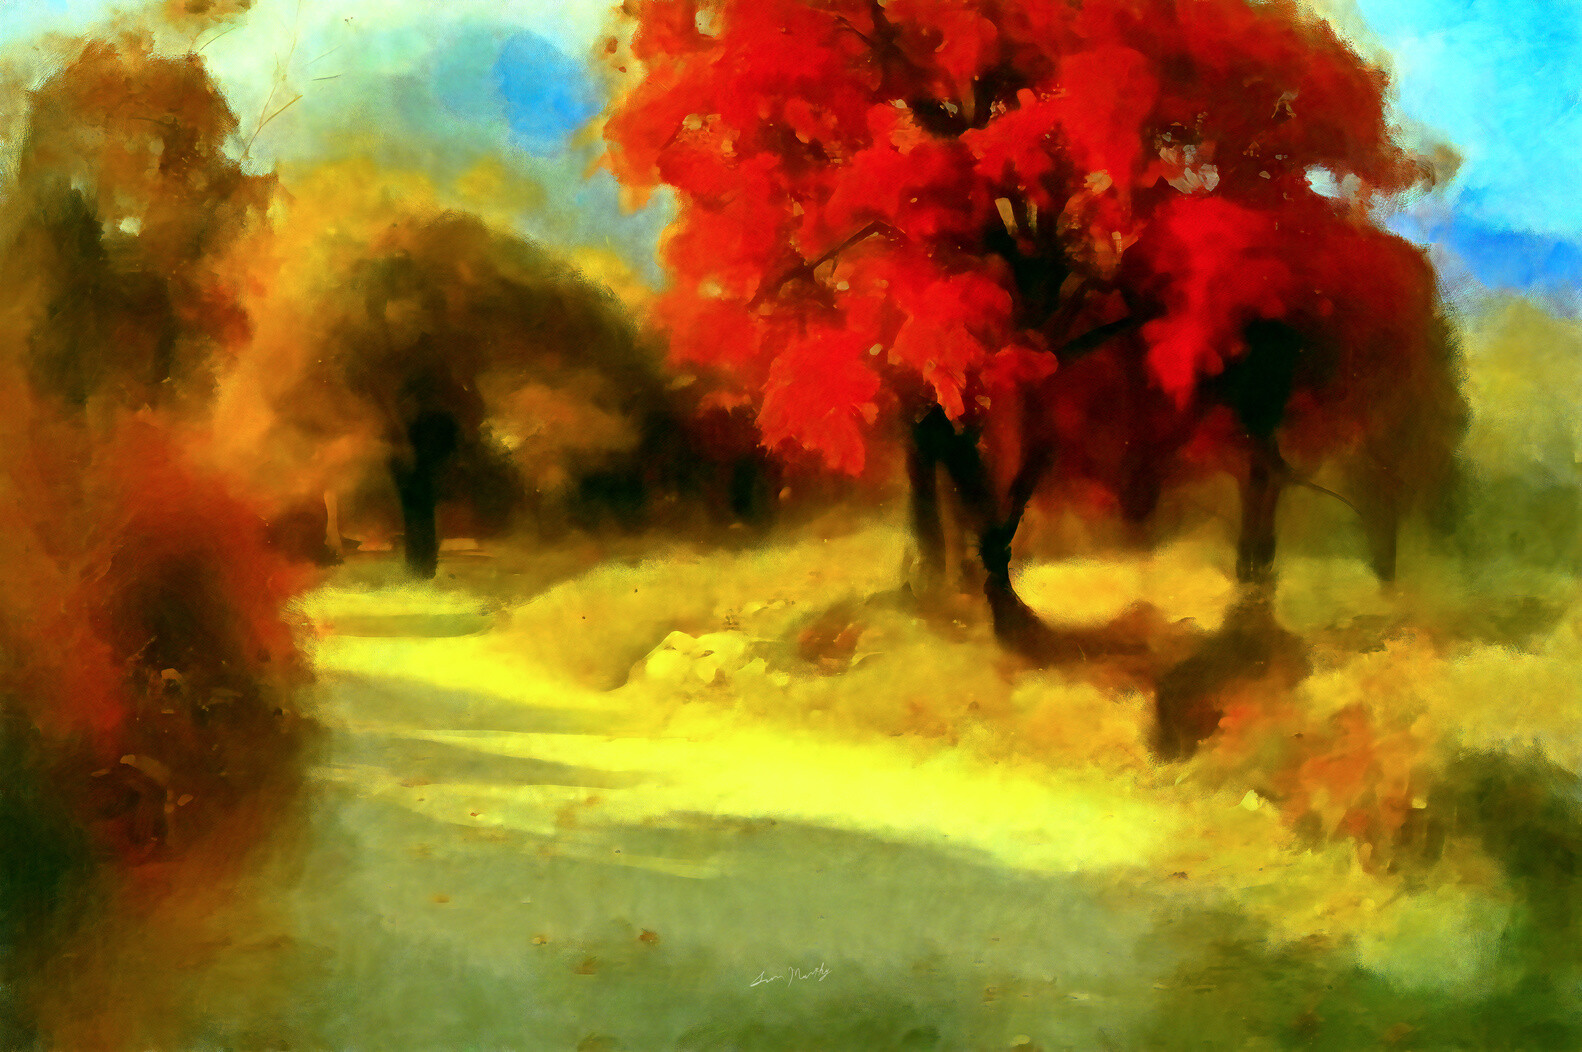 "Autumn Gravel Road" impressionist style digital painting over ink.